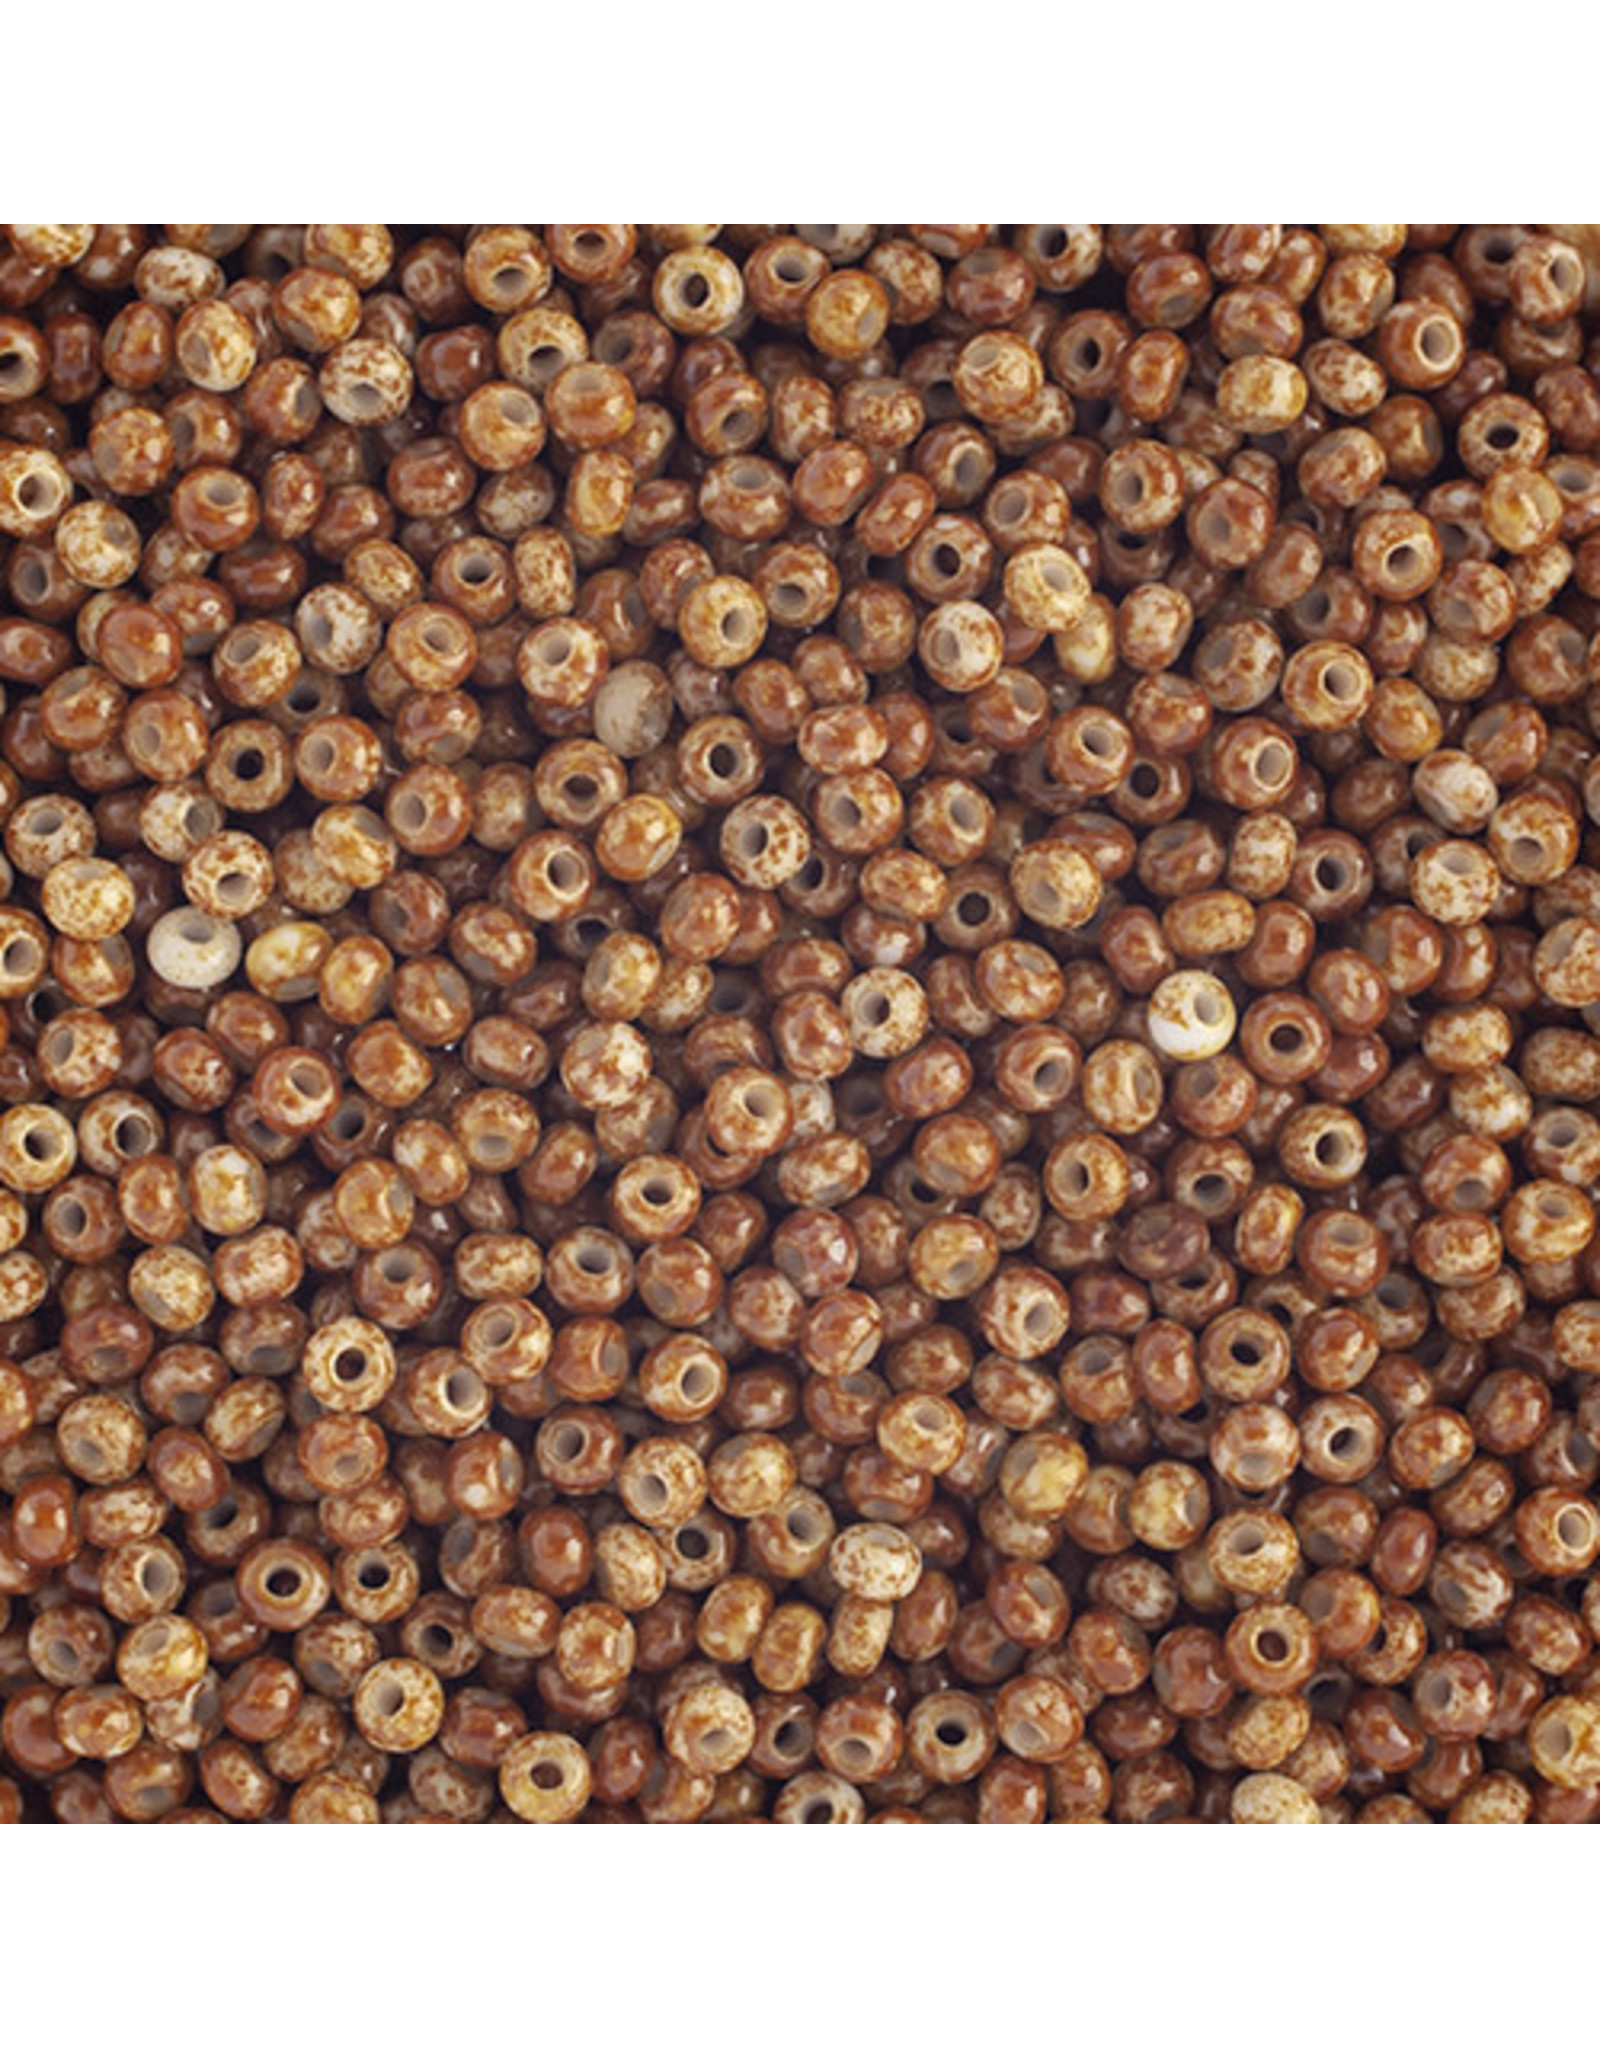 Czech 1522  10  Seed 125g  Opaque Brown/White Speckled